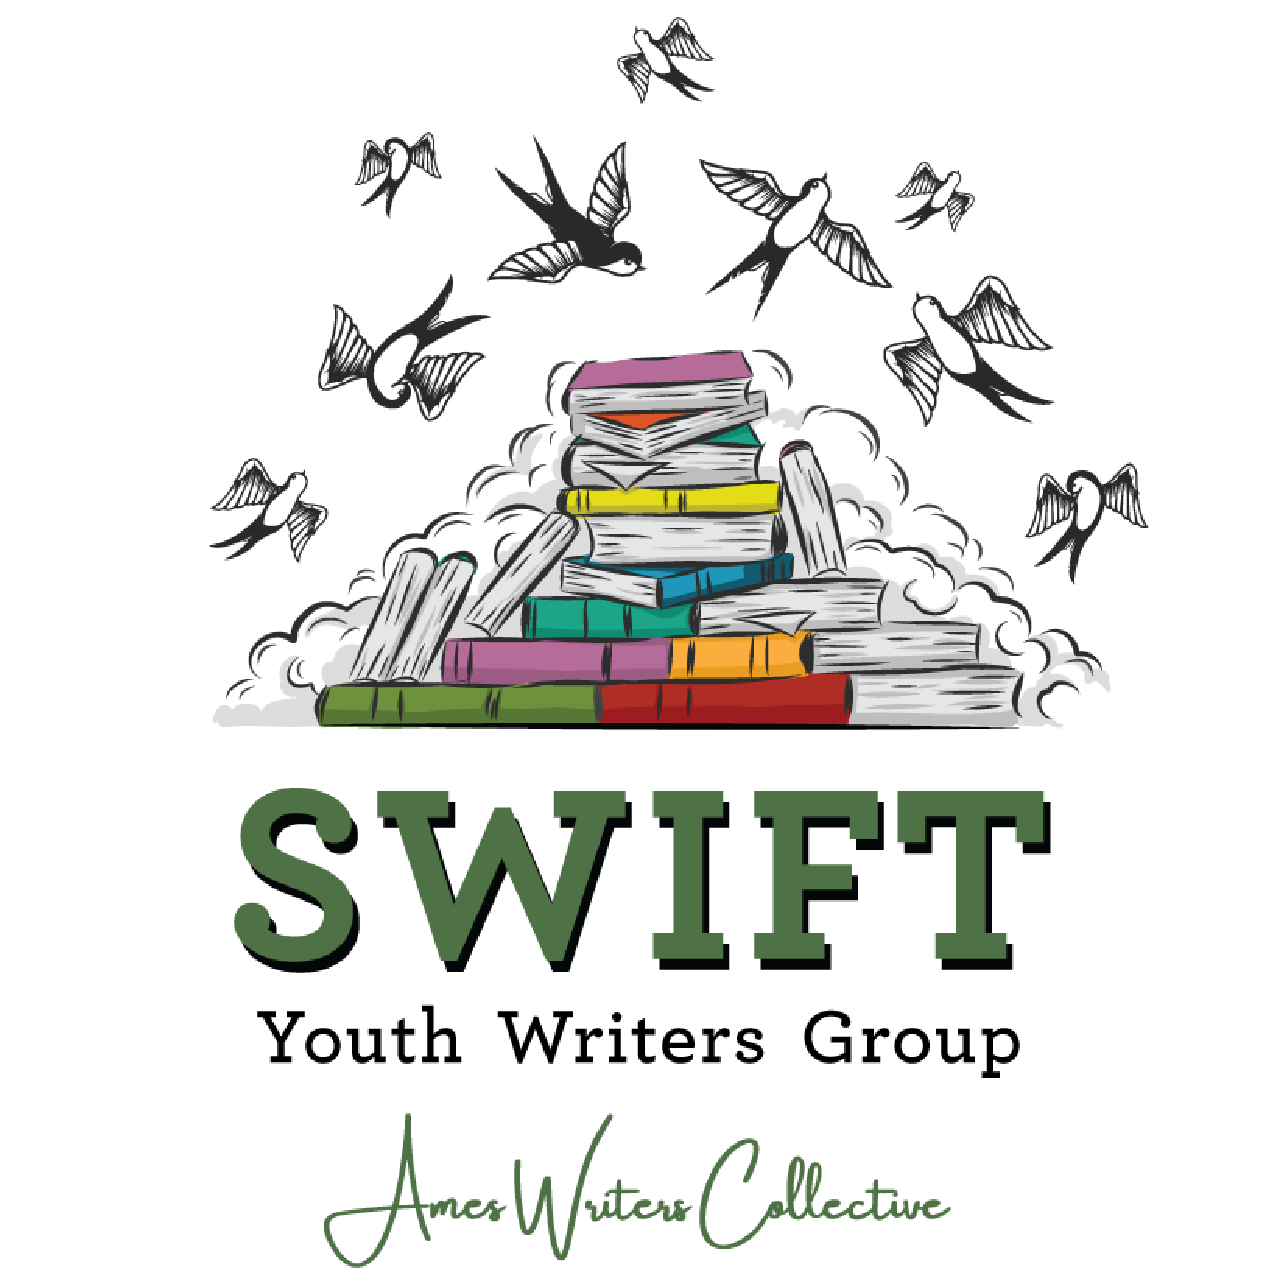 Swift Youth Writers Group, Ames Writers Collective